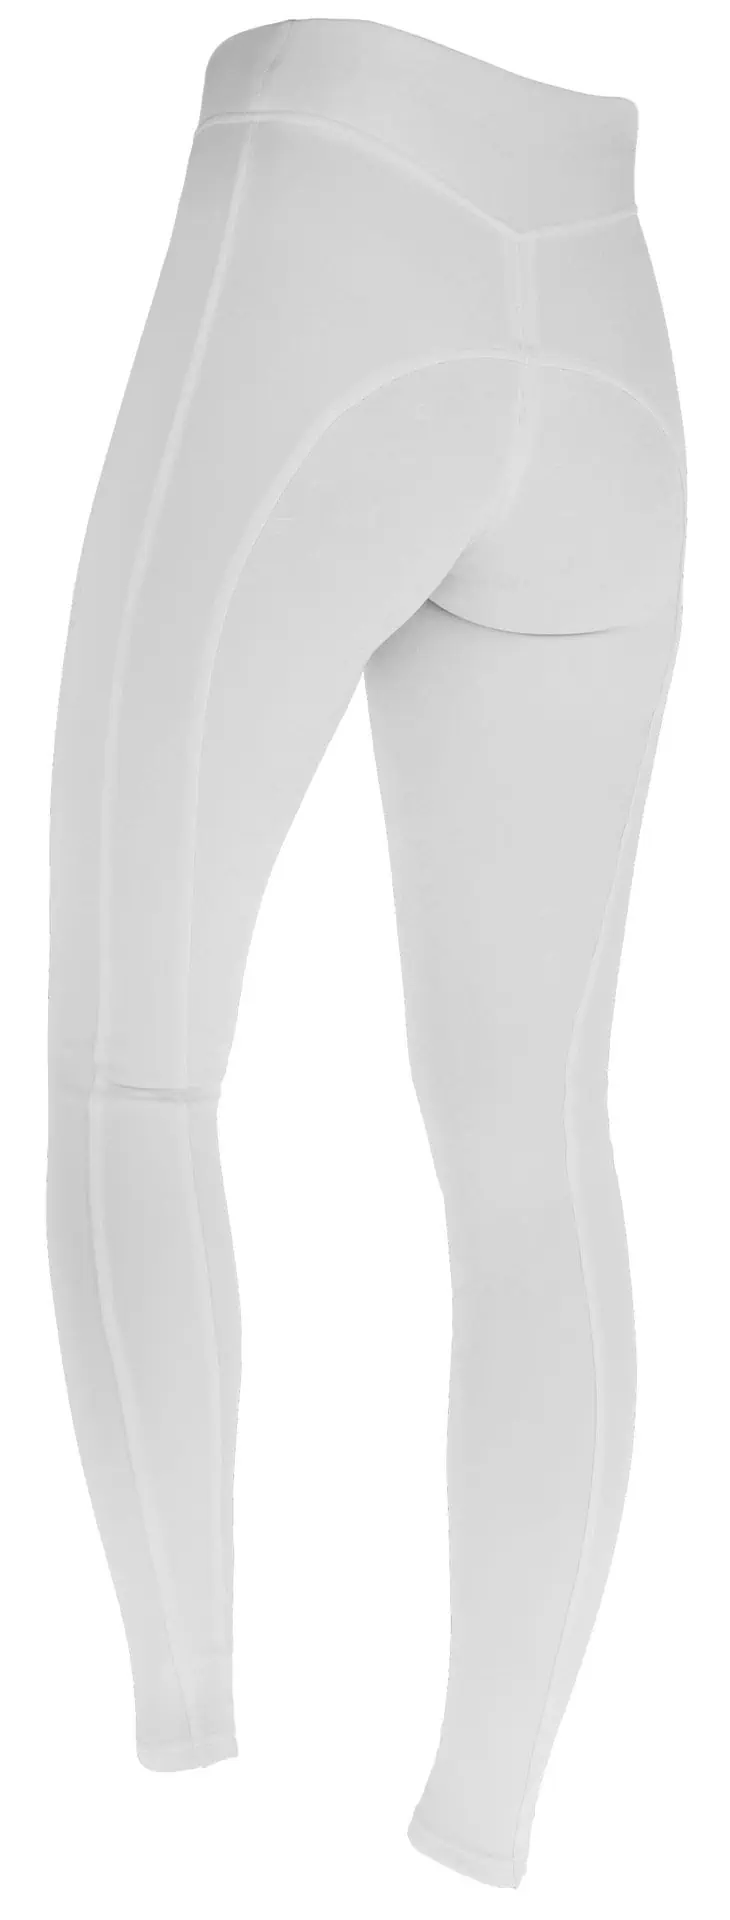 Rid. Tights ClassicStar Ladies white, Size 42/44